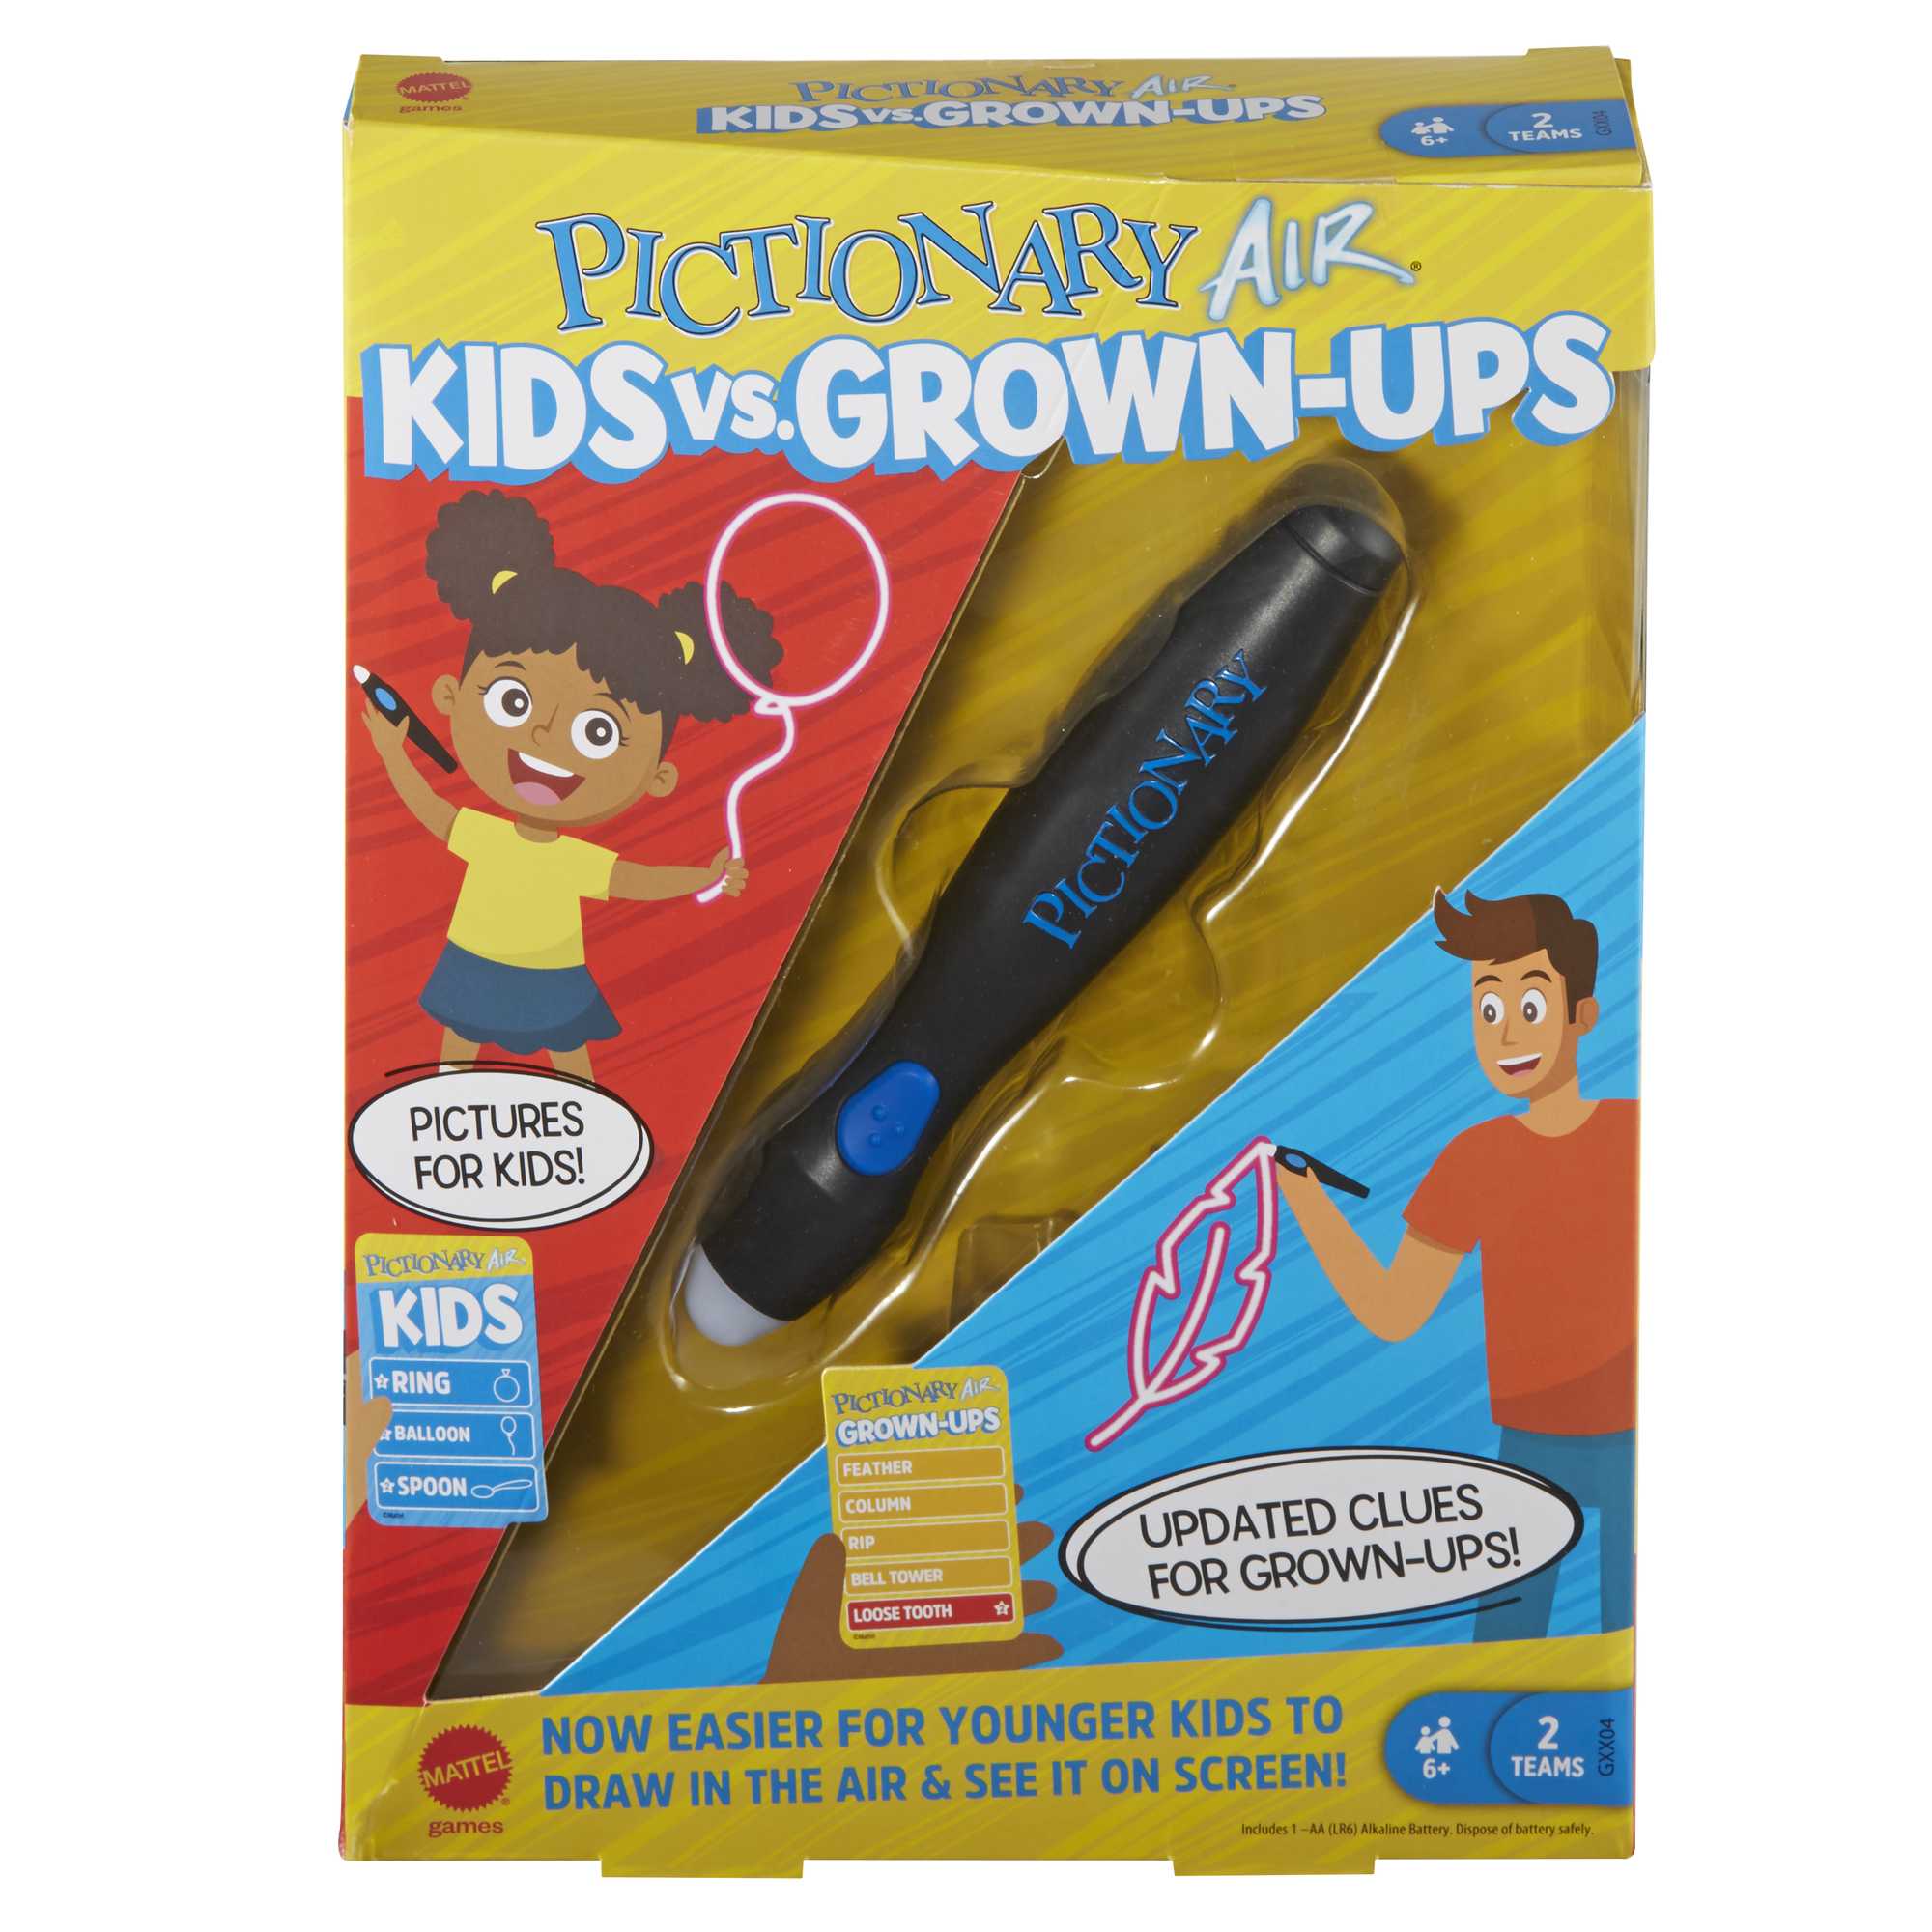 Baby and kid - The new Pictionary Air 2. Now available at